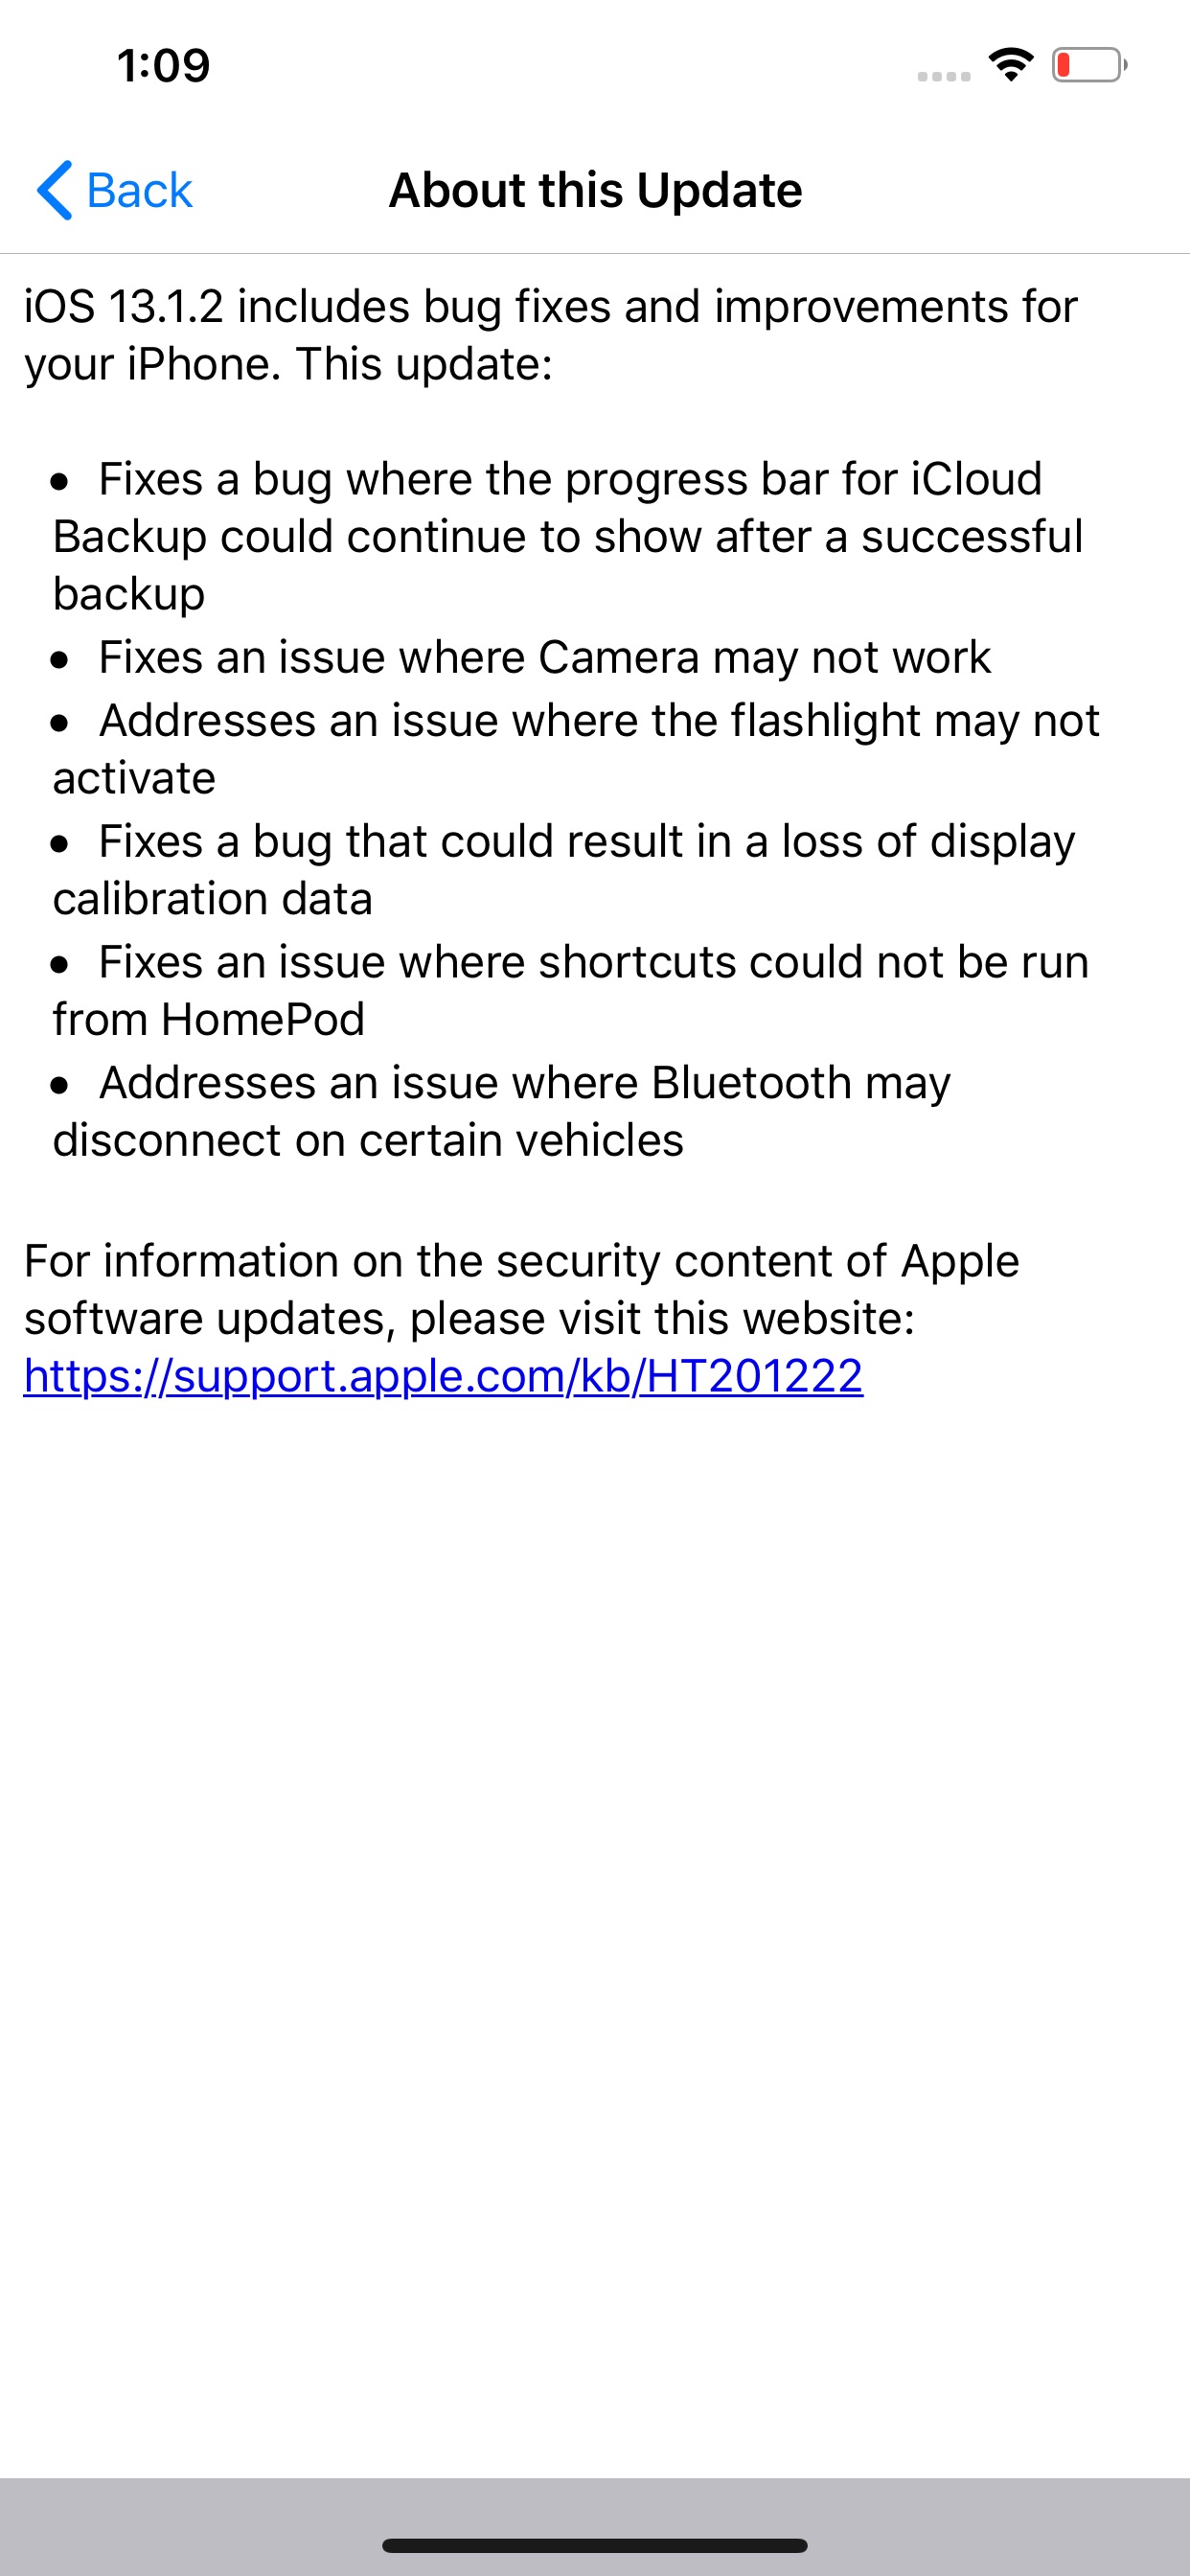 Apple Releases iOS 13.1.2 to Fix Bugs With Camera, iCloud Backup, Flashlight, More